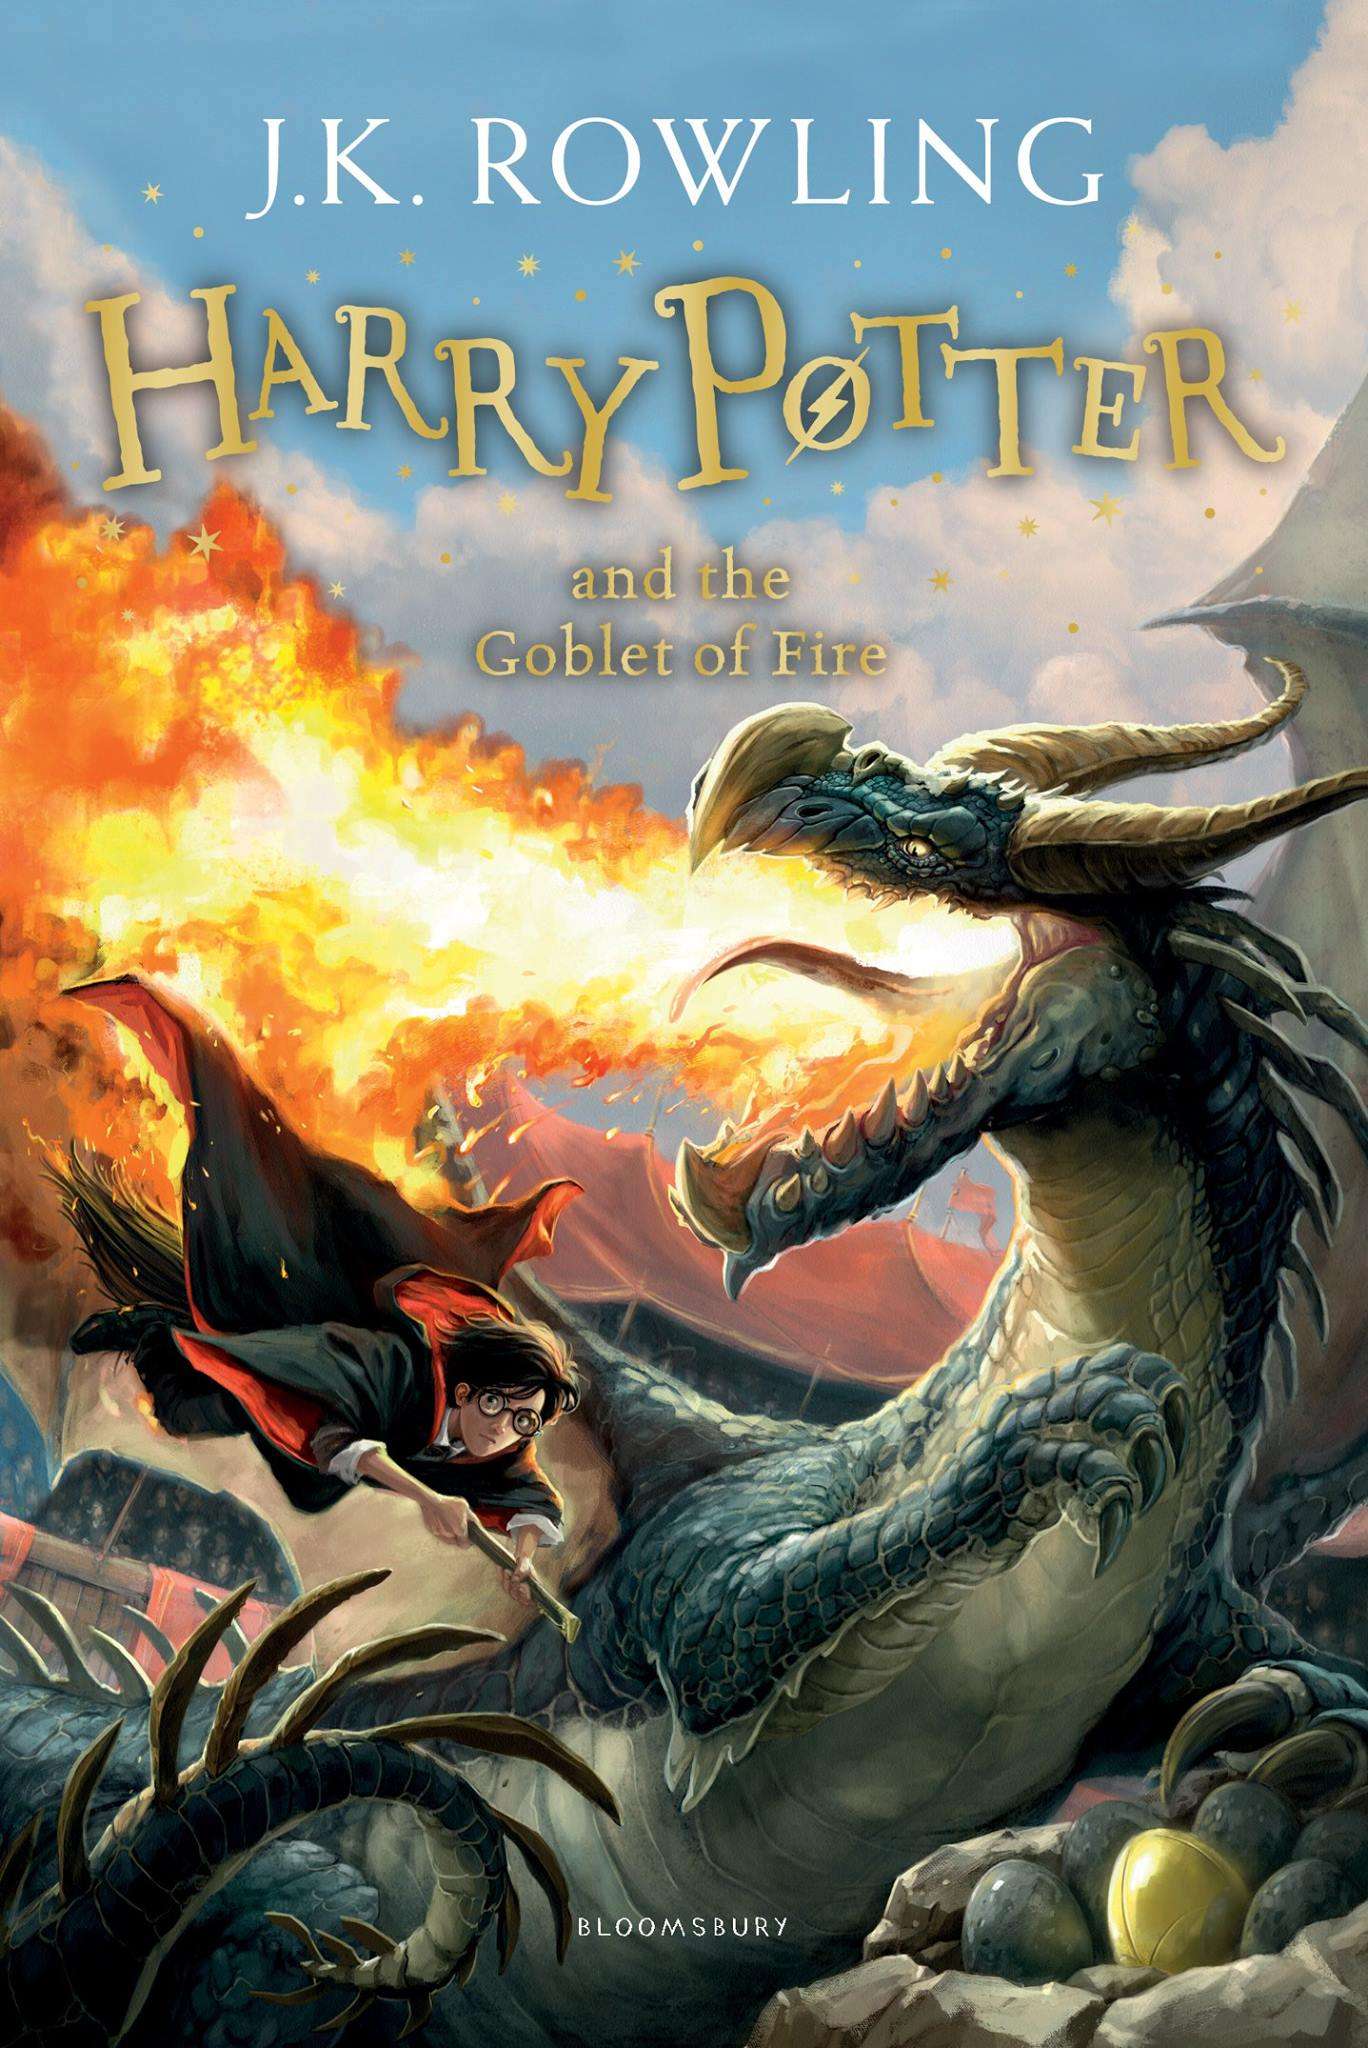 Harry Potter and the Goblet of Fire by J.K Rowling â Mr ...